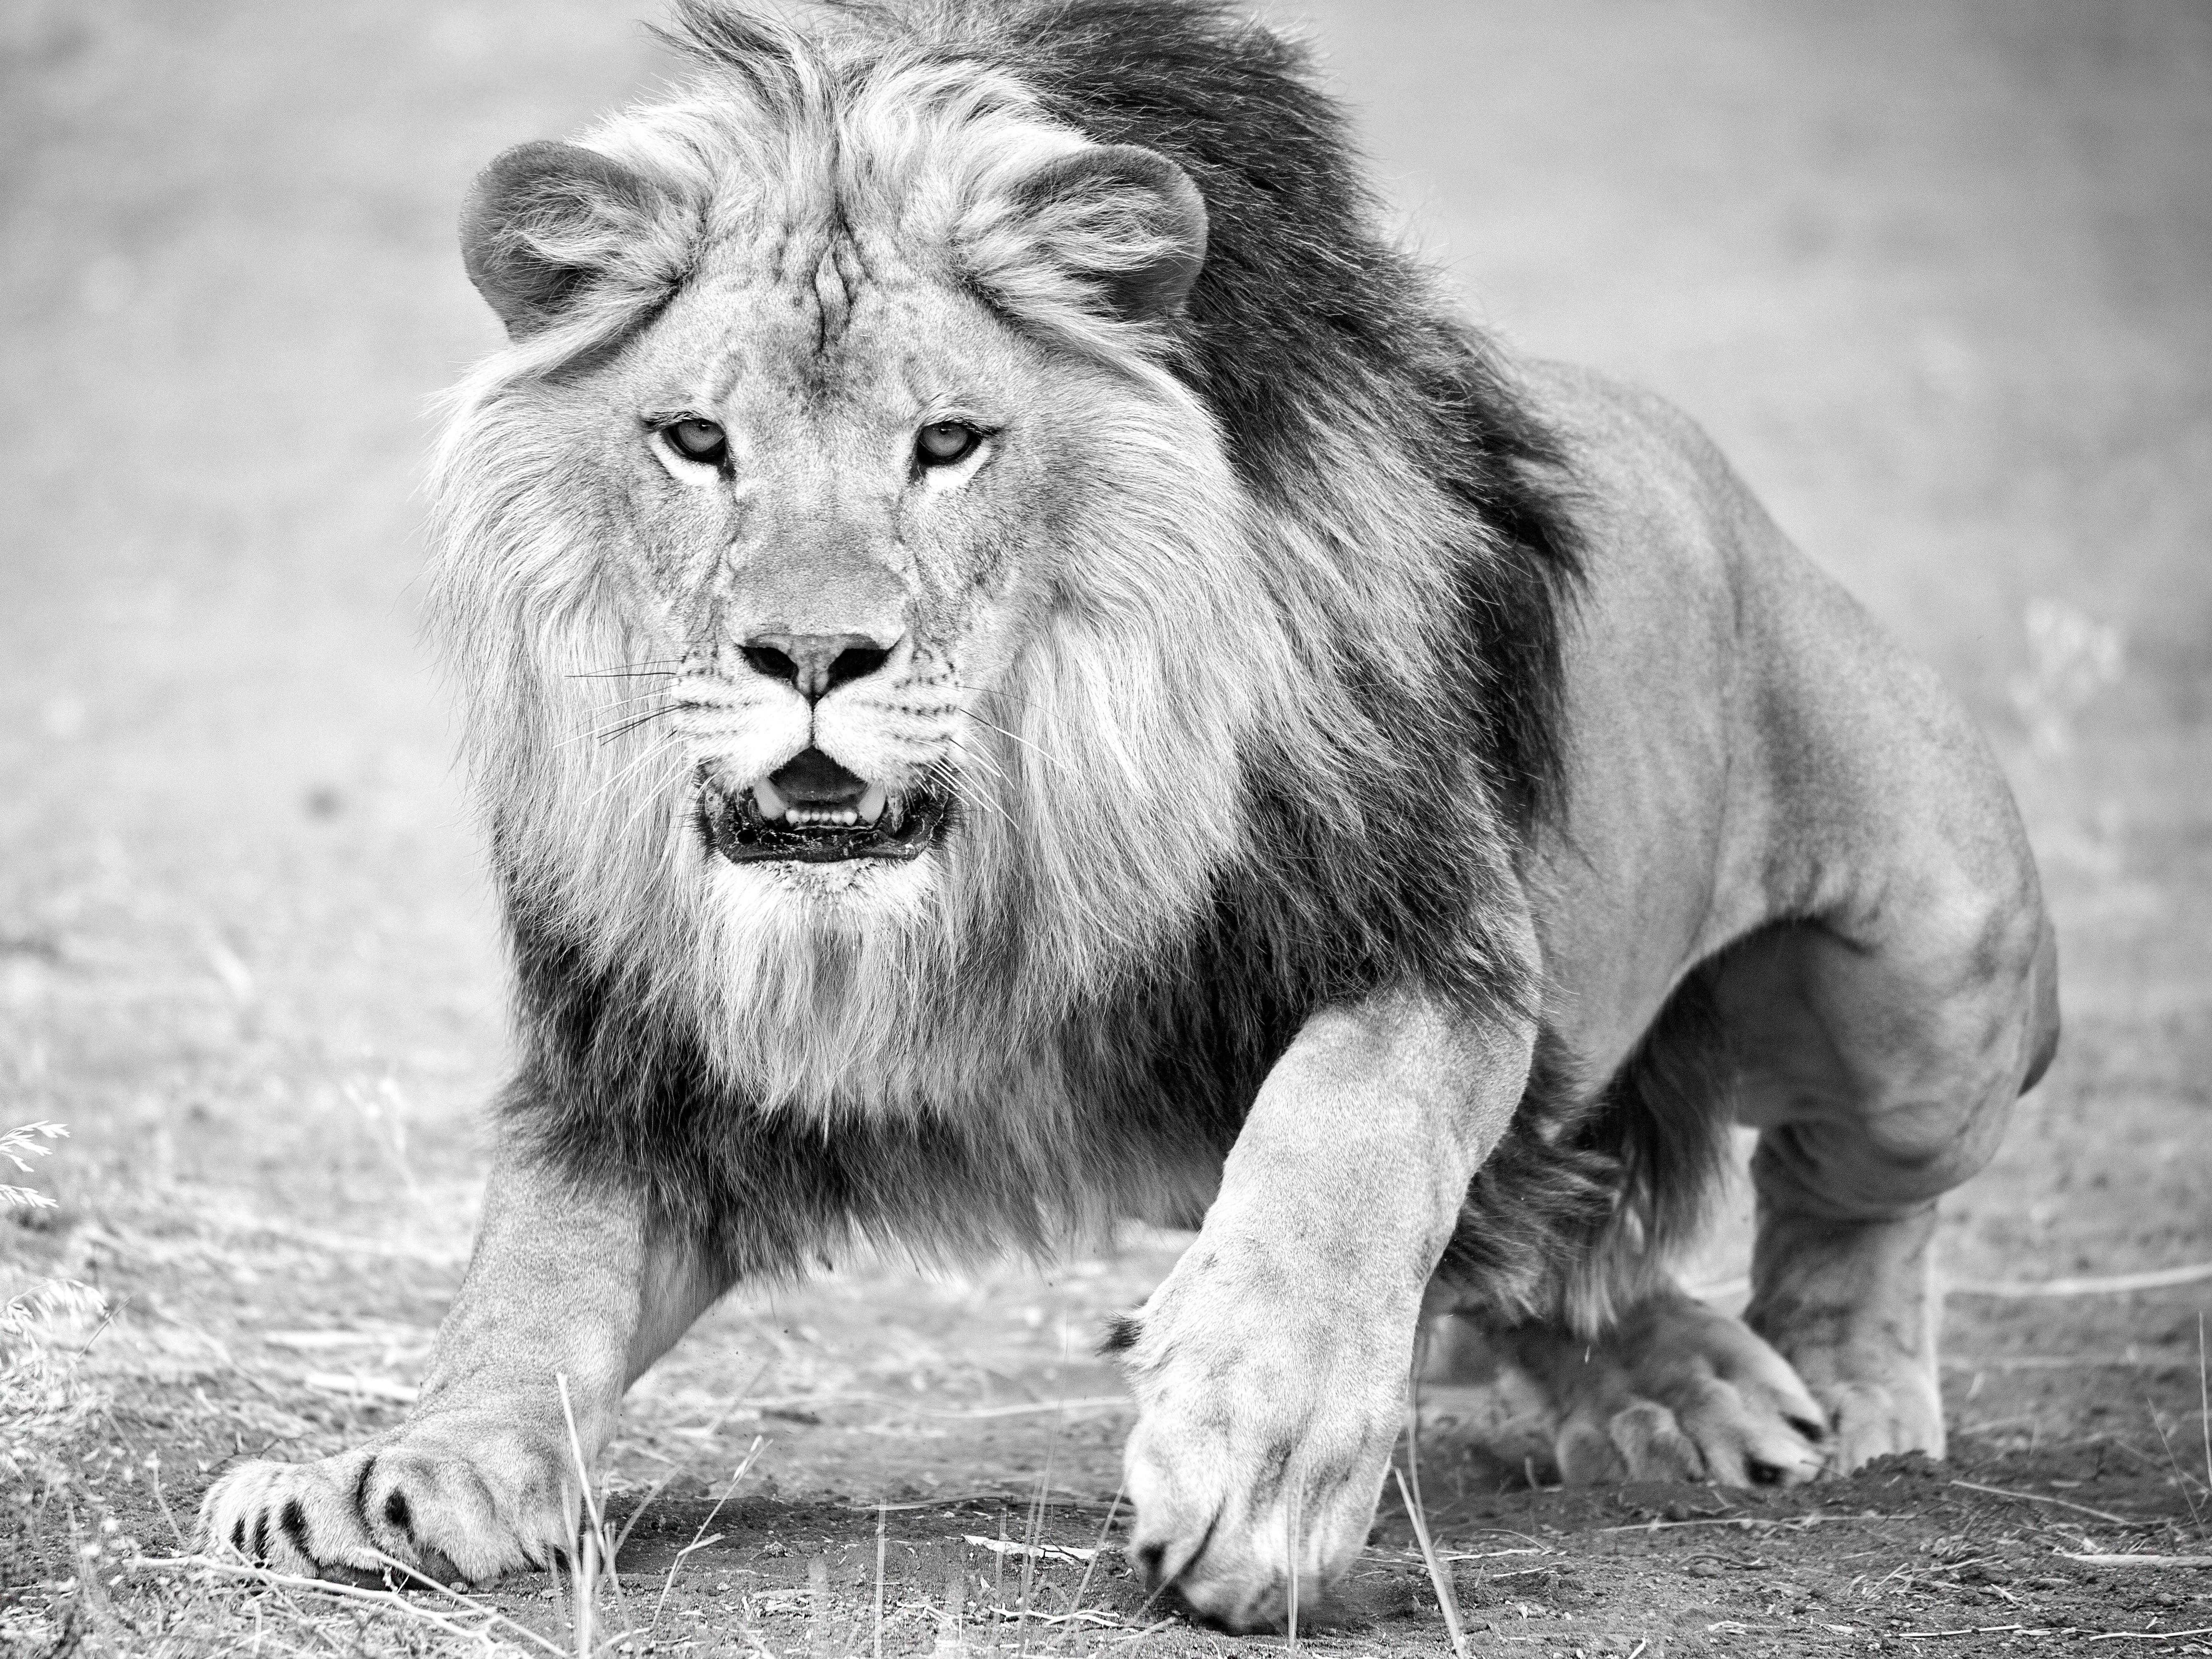 "The Charge" 36x48 - Black & White Photography, Lion Photograph 